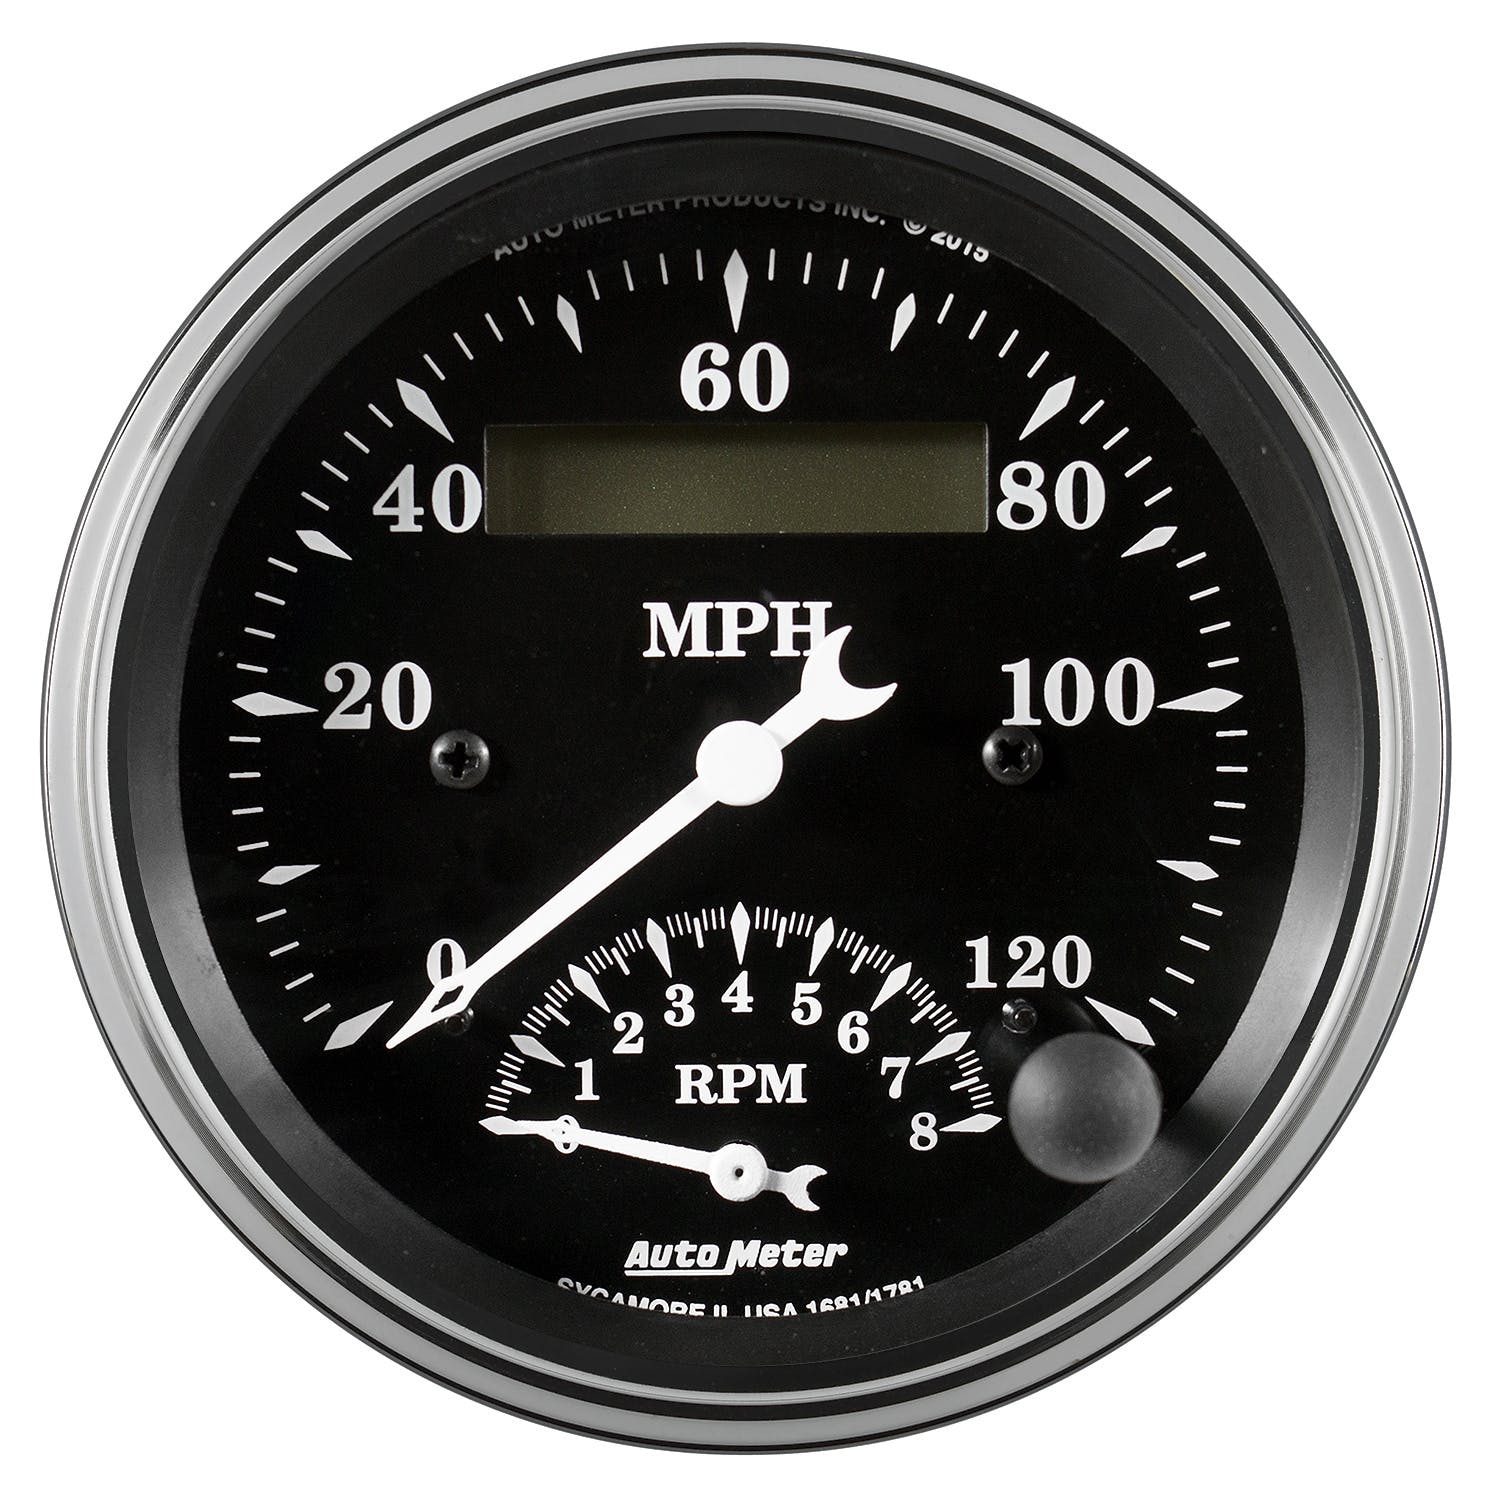 AutoMeter Products 1781 Tach/Speedometer Gauge 120mph, 8K RPM Old Tyme Black